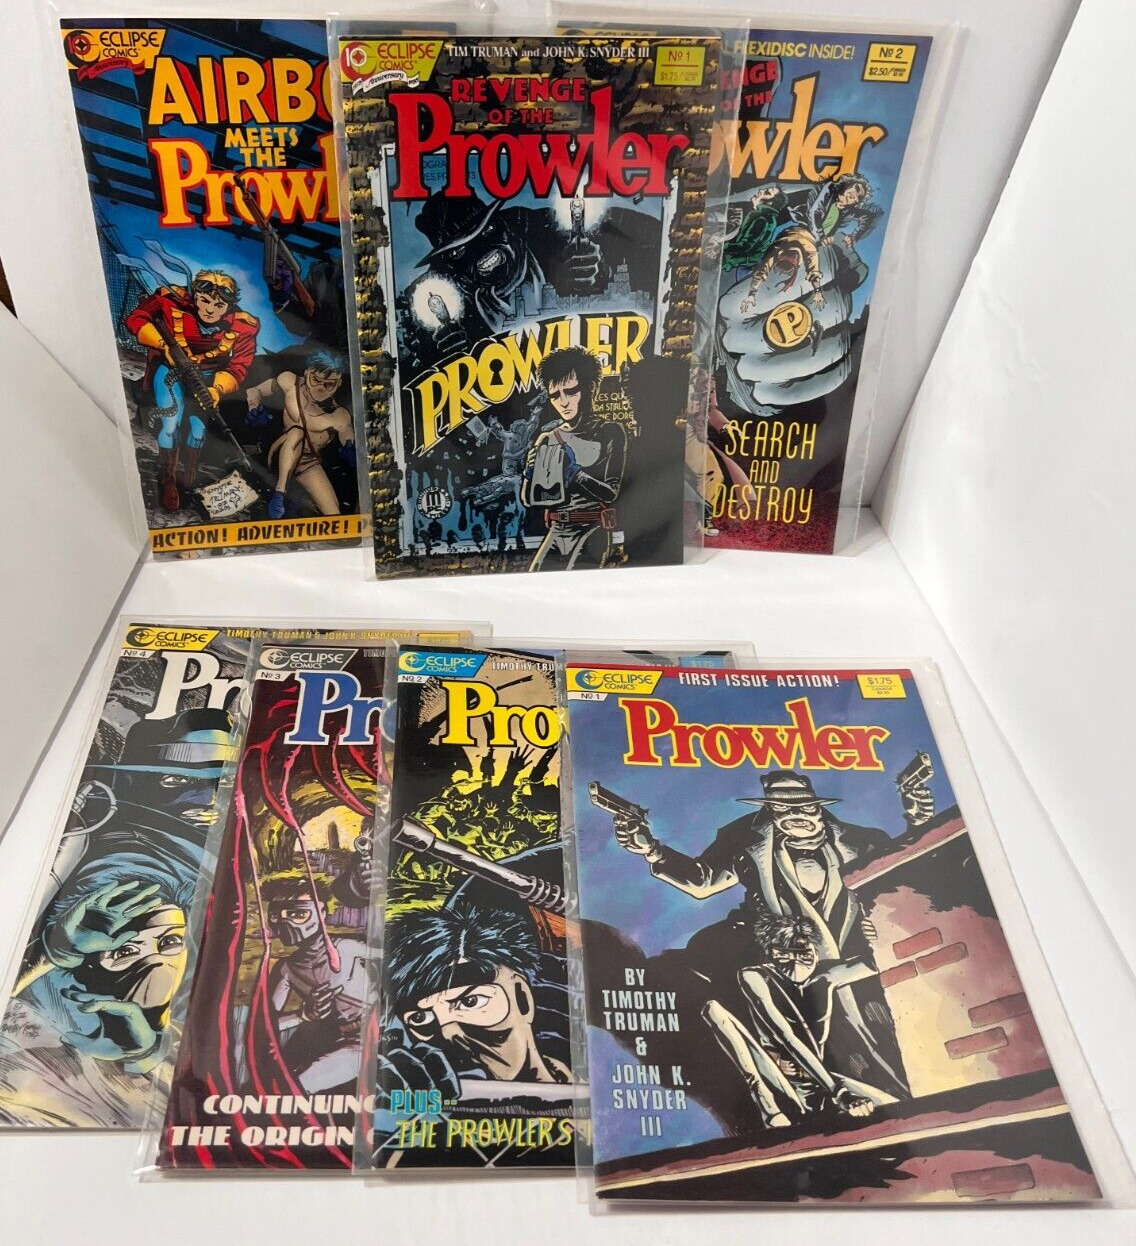 The Prowler #1-4 1987 NM + 3 more prowlers AIRBOY Timothy Truman Eclipse Comics